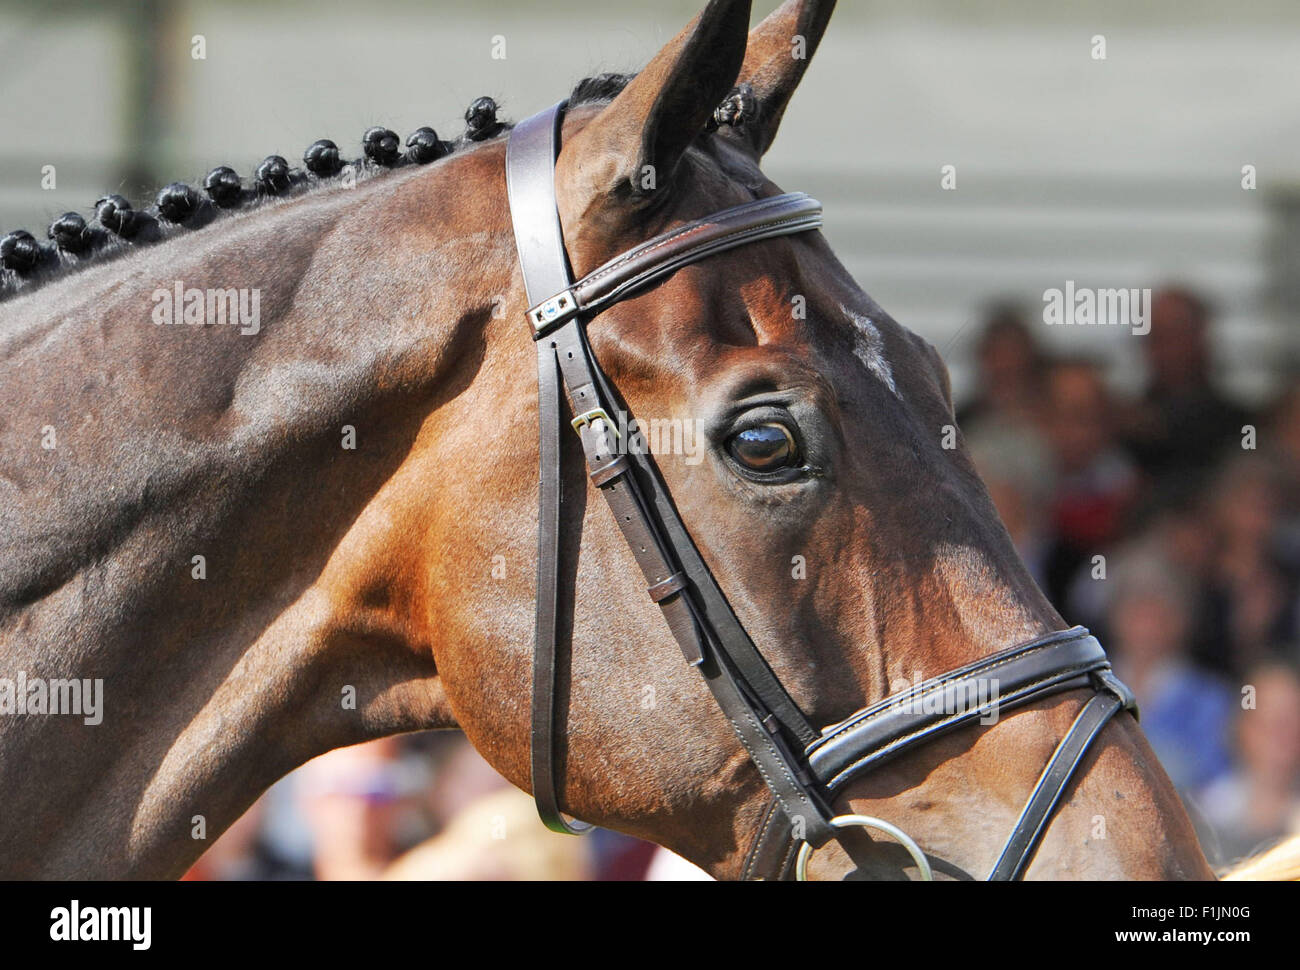 Stamford, UK. 2nd September, 2015. Land Rover Burghley Horse Trials 2015, Stamford England.  Rosalind Canter (GBR) riding Allstar B  during the First Inspection Credit:  Julie Badrick/Alamy Live News Stock Photo